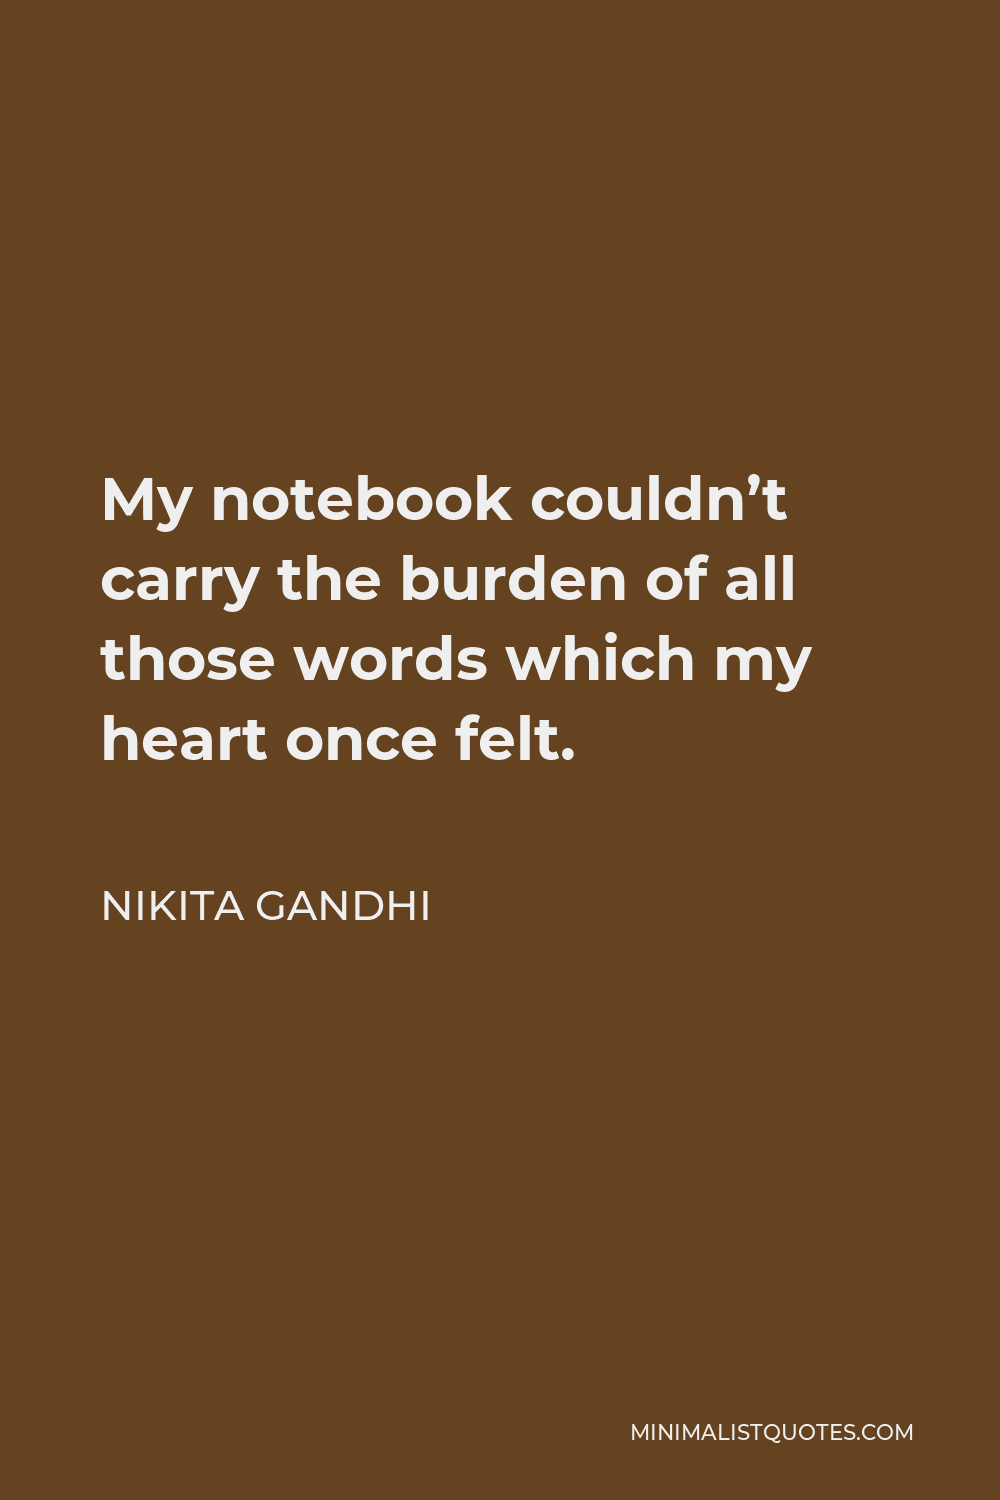 Nikita Gandhi Quote - My notebook couldn’t carry the burden of all those words which my heart once felt.